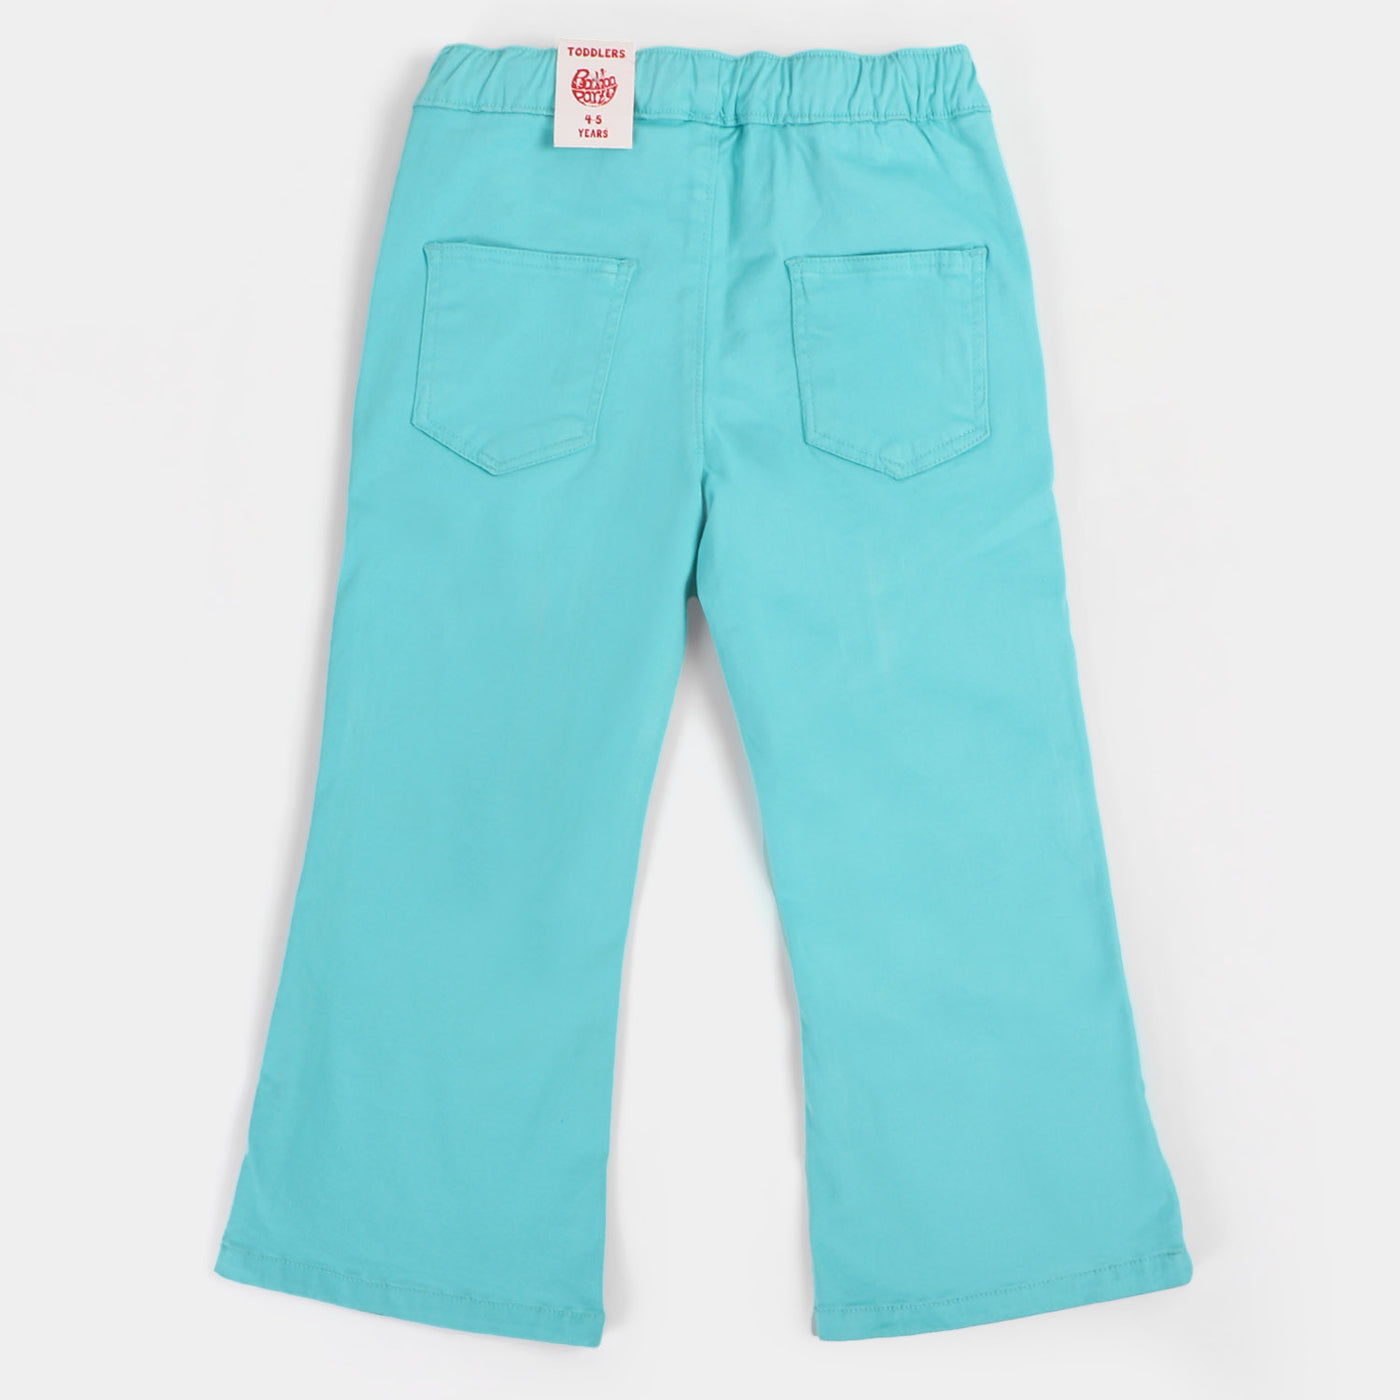 Girls Cotton Pant Awesome Today - SKY BLUE